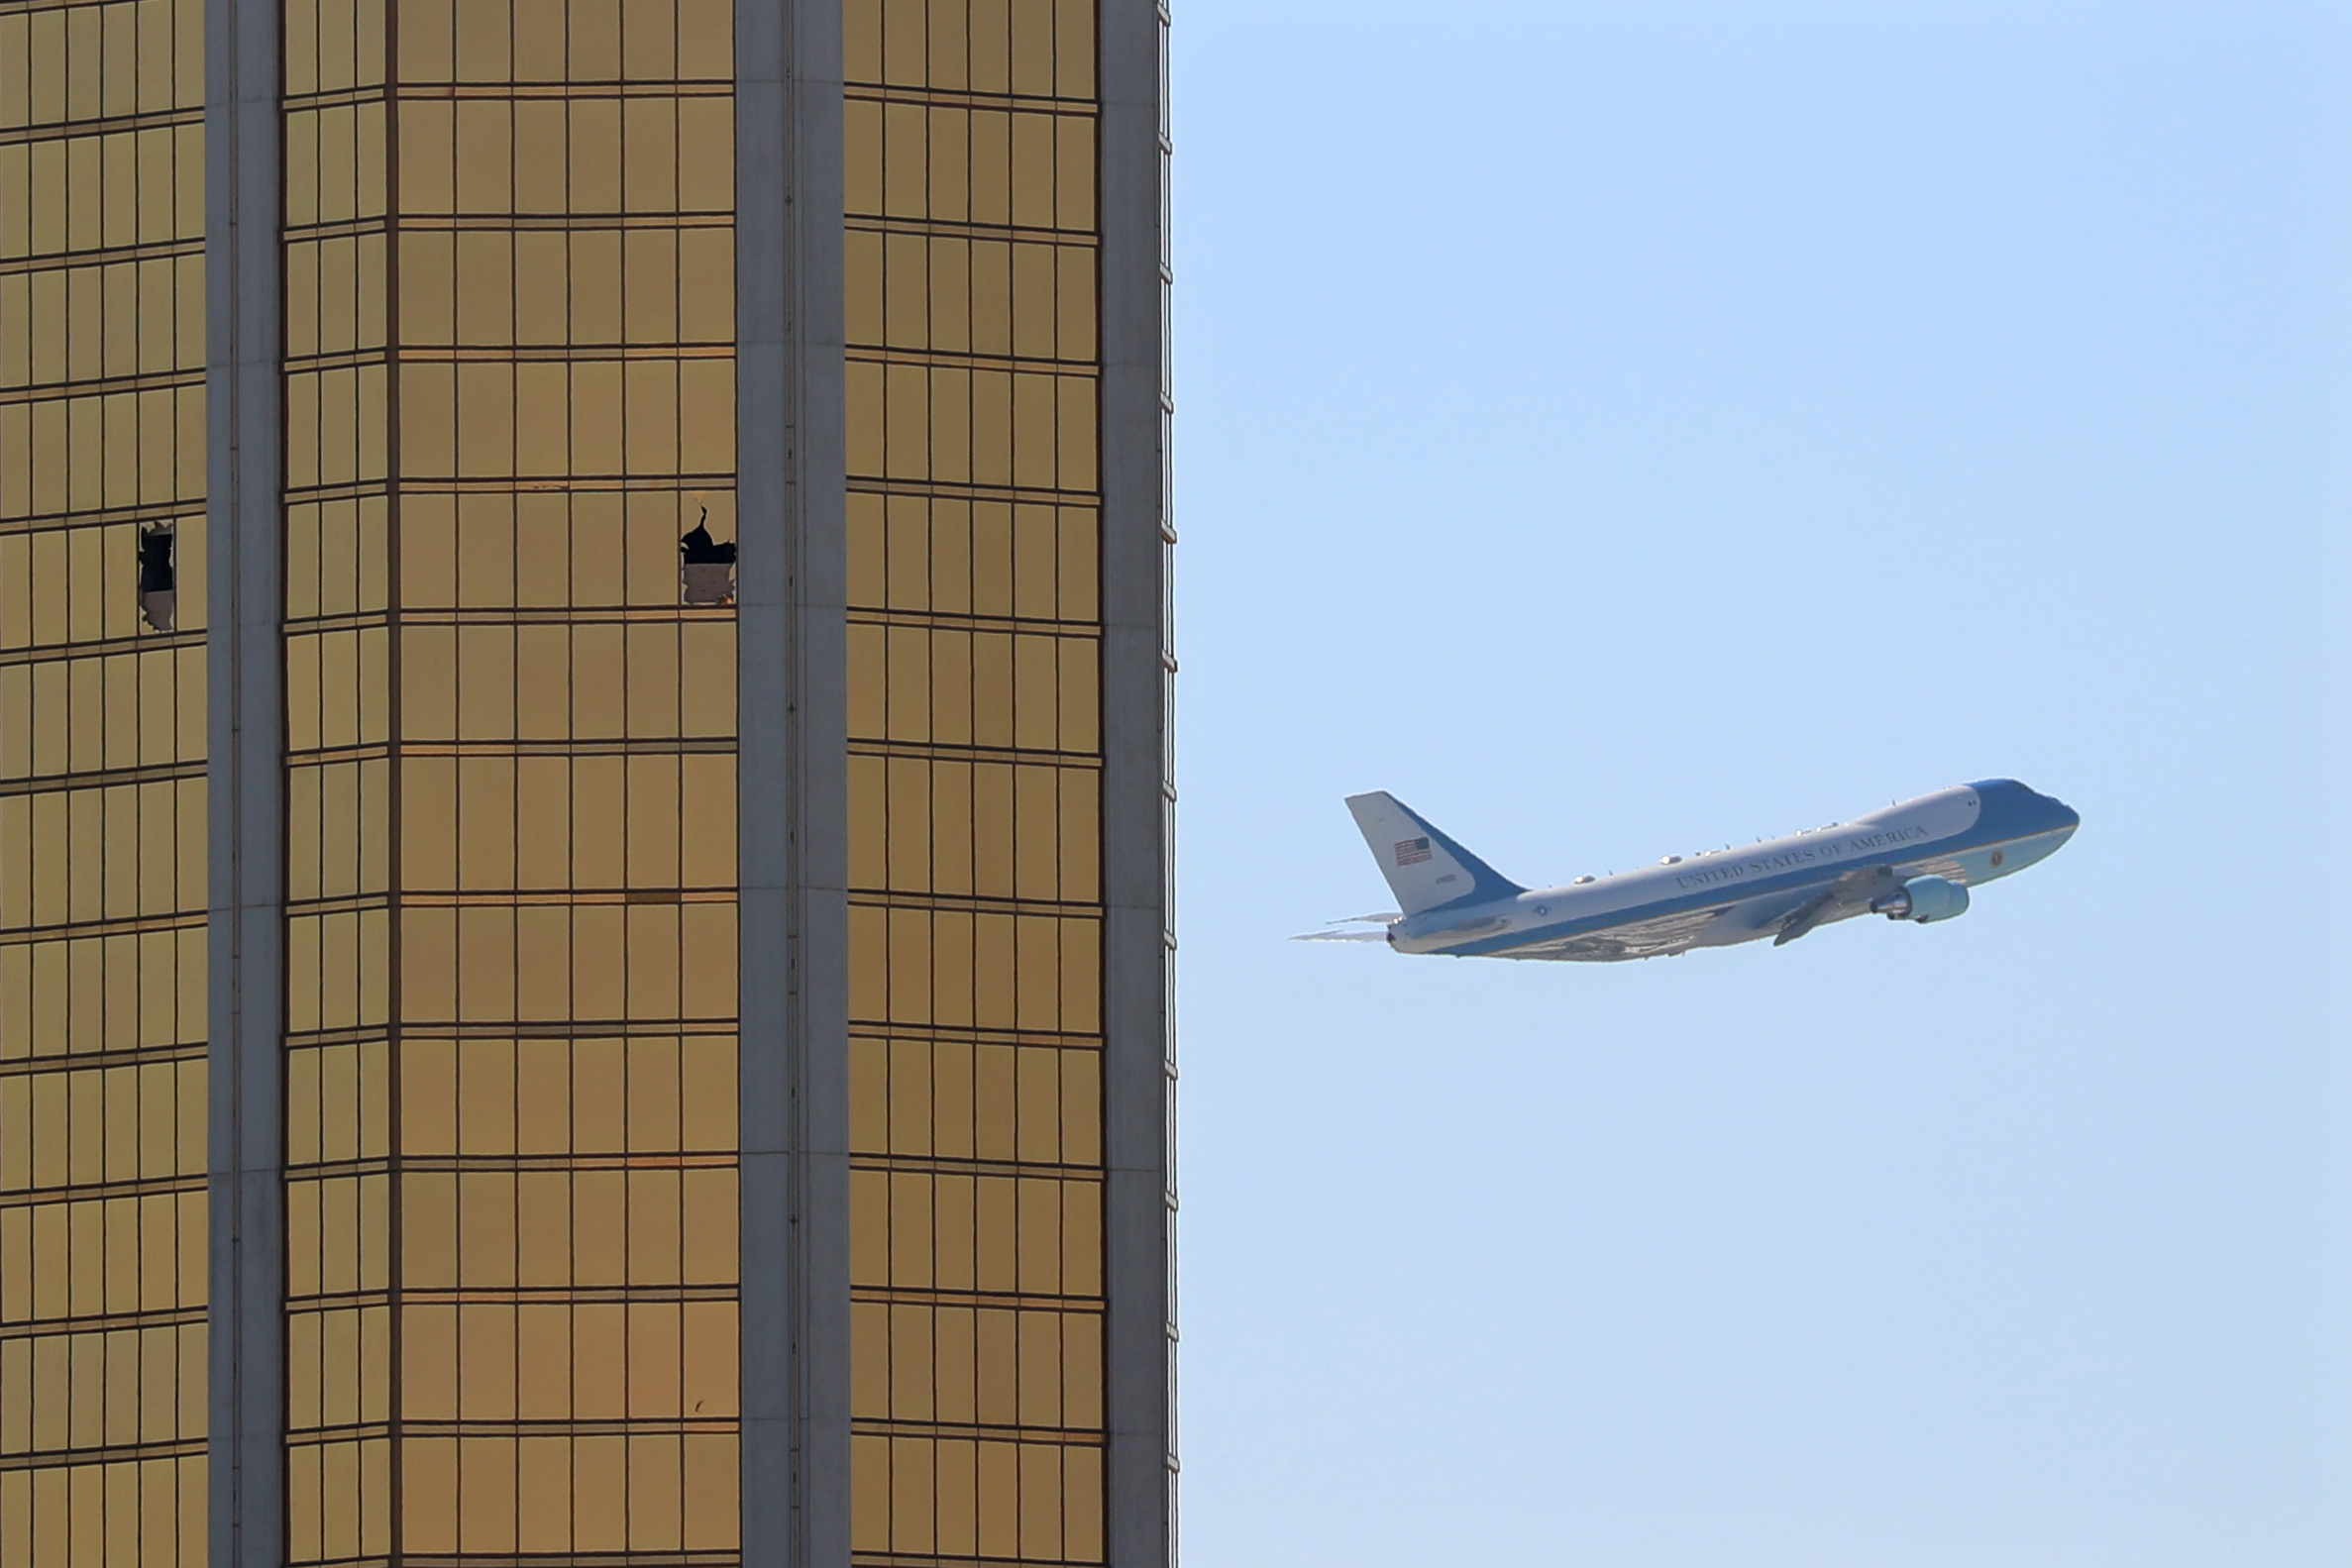 Air Force One departs Las Vegas past the broken windows on the Mandalay Bay hotel, where shooter Stephen Paddock conducted his mass shooting along the Las Vegas Strip on Oct. 4, 2017. (Mike Blake—Reuters)